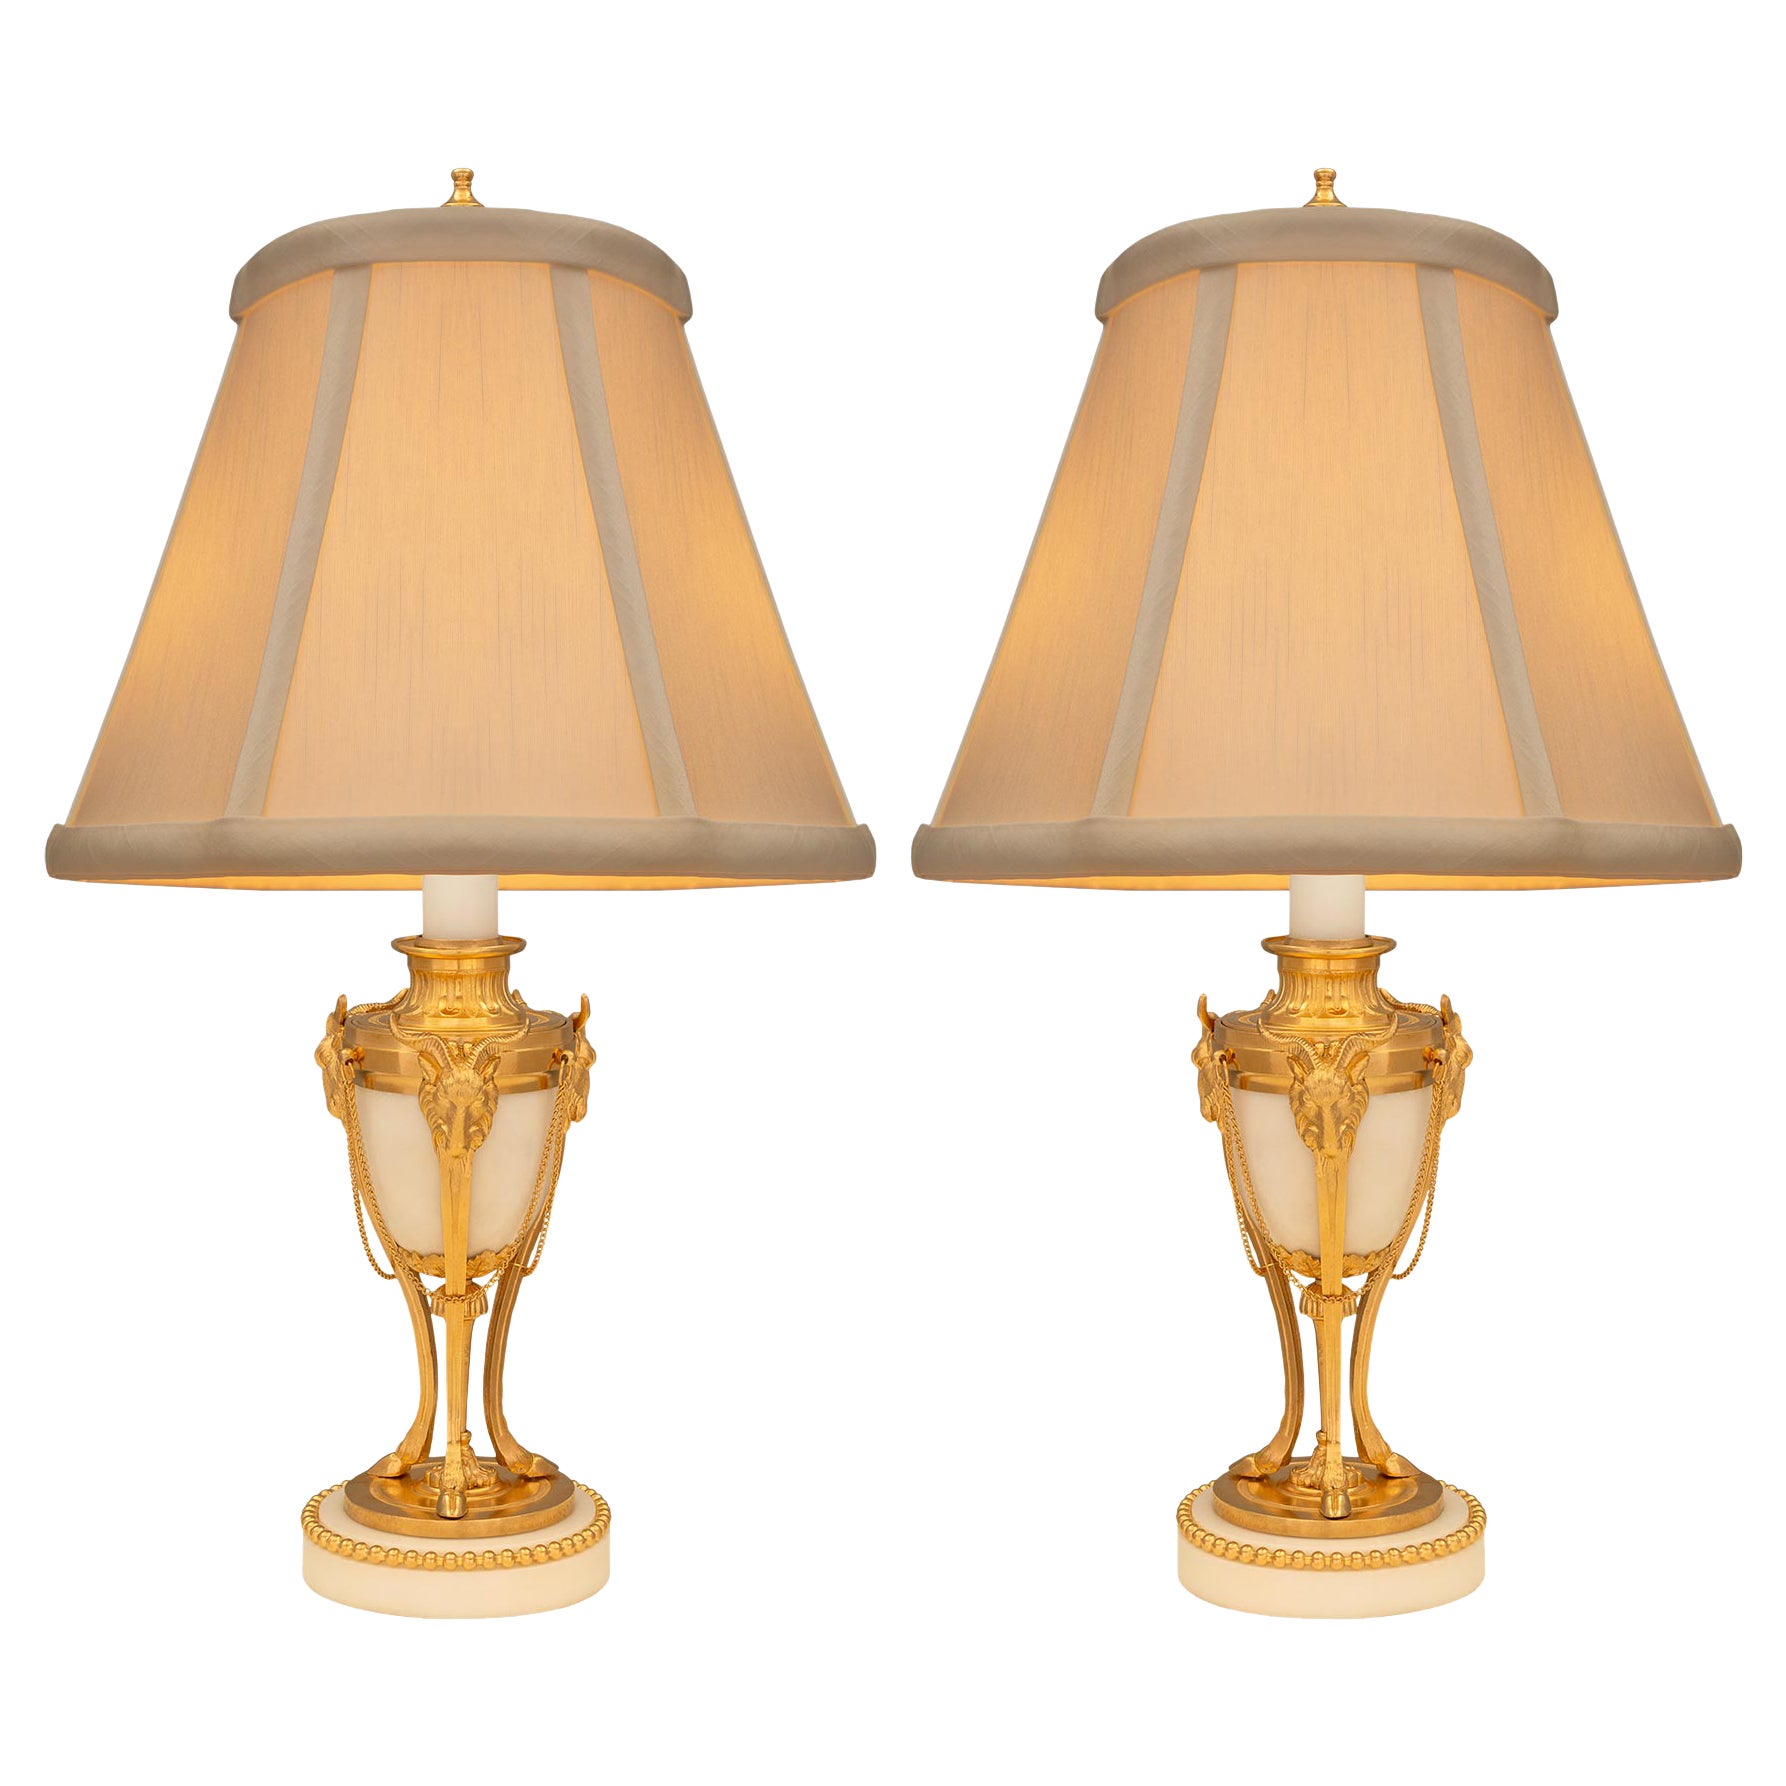 Pair of French 19th Century Louis XVI St. White Carrara Marble and Ormolu Lamps For Sale